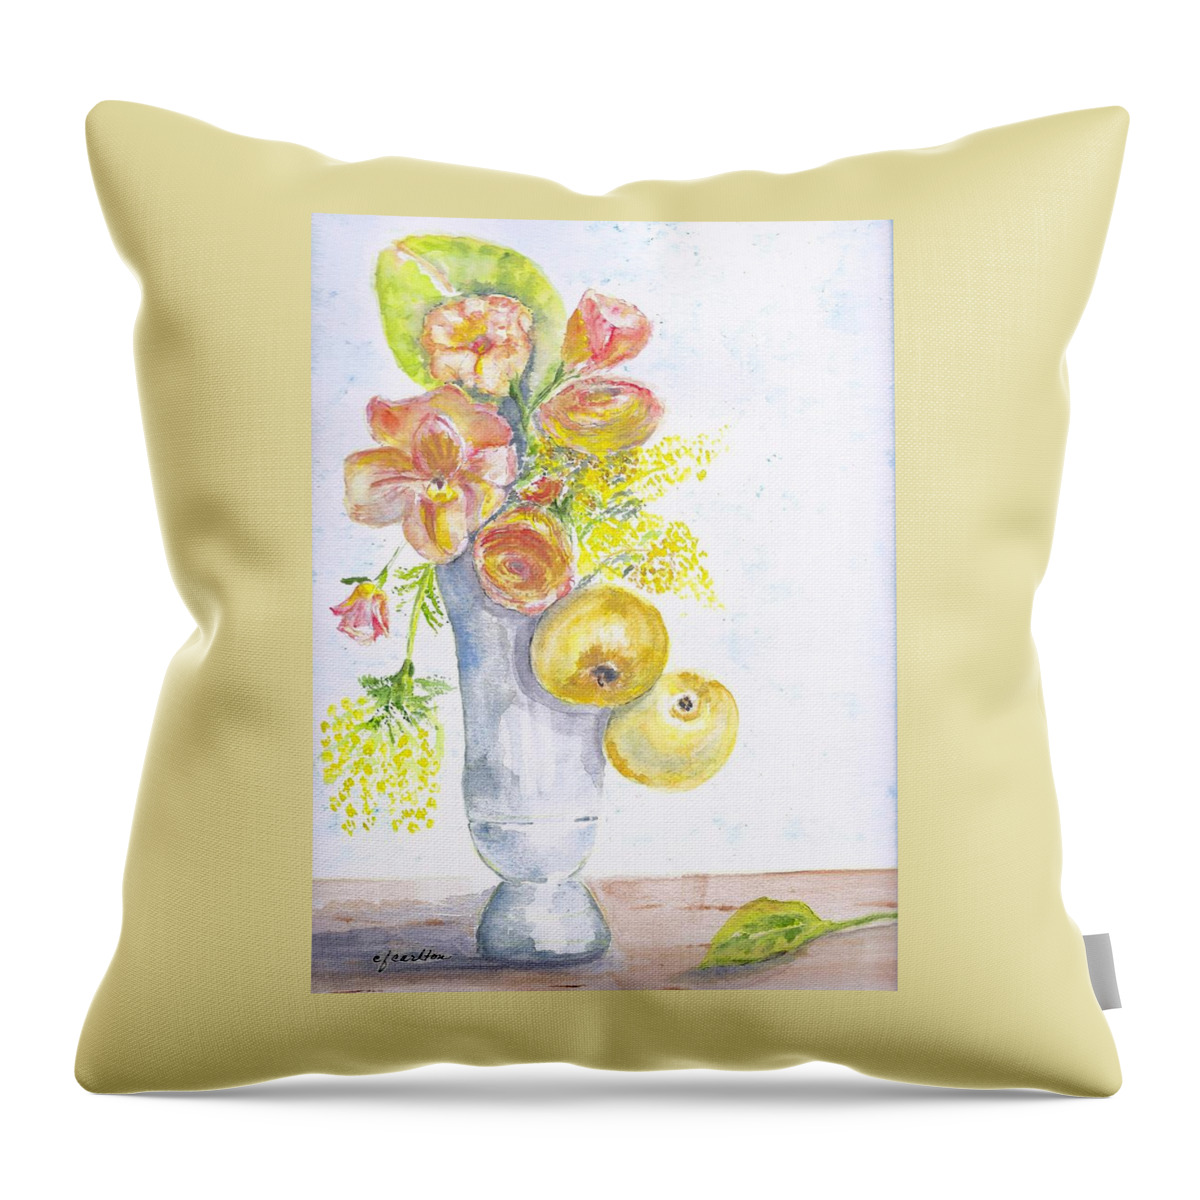 Fruit Throw Pillow featuring the painting Fruit and Flowers by Claudette Carlton